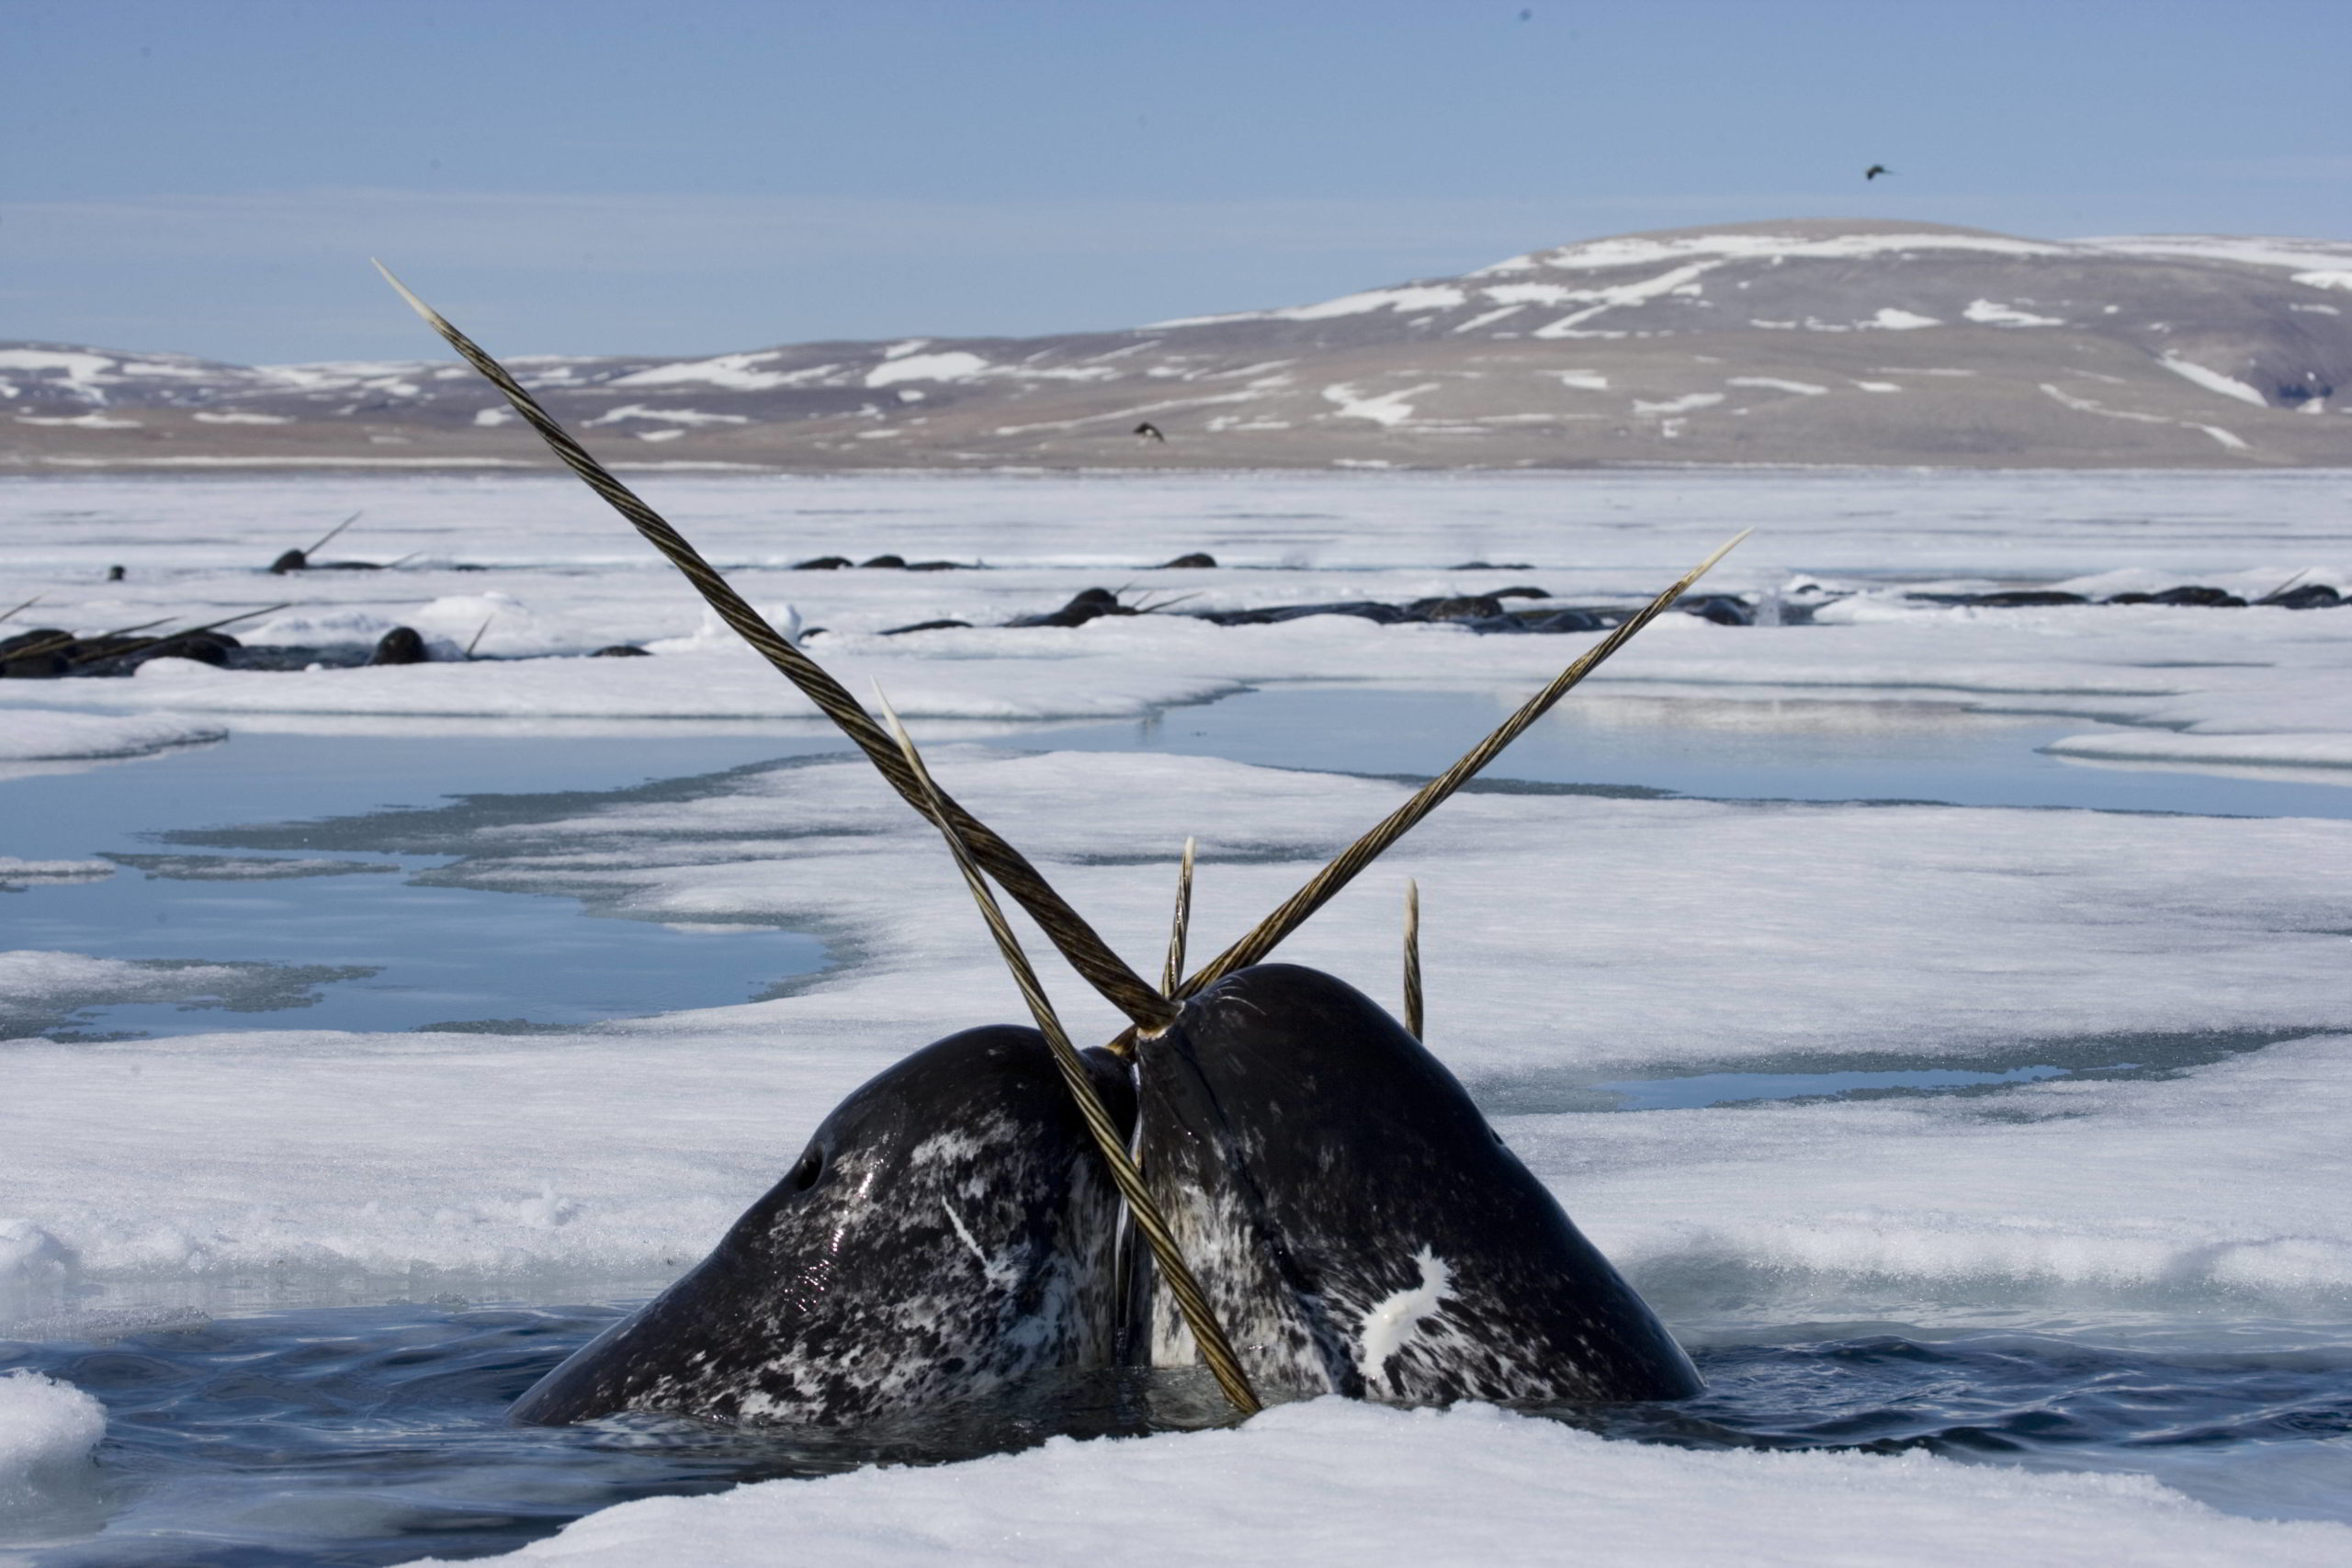 Narwhal Two narwhal surfacing to breathe in Lancaster Sound, Nunavut, Canada